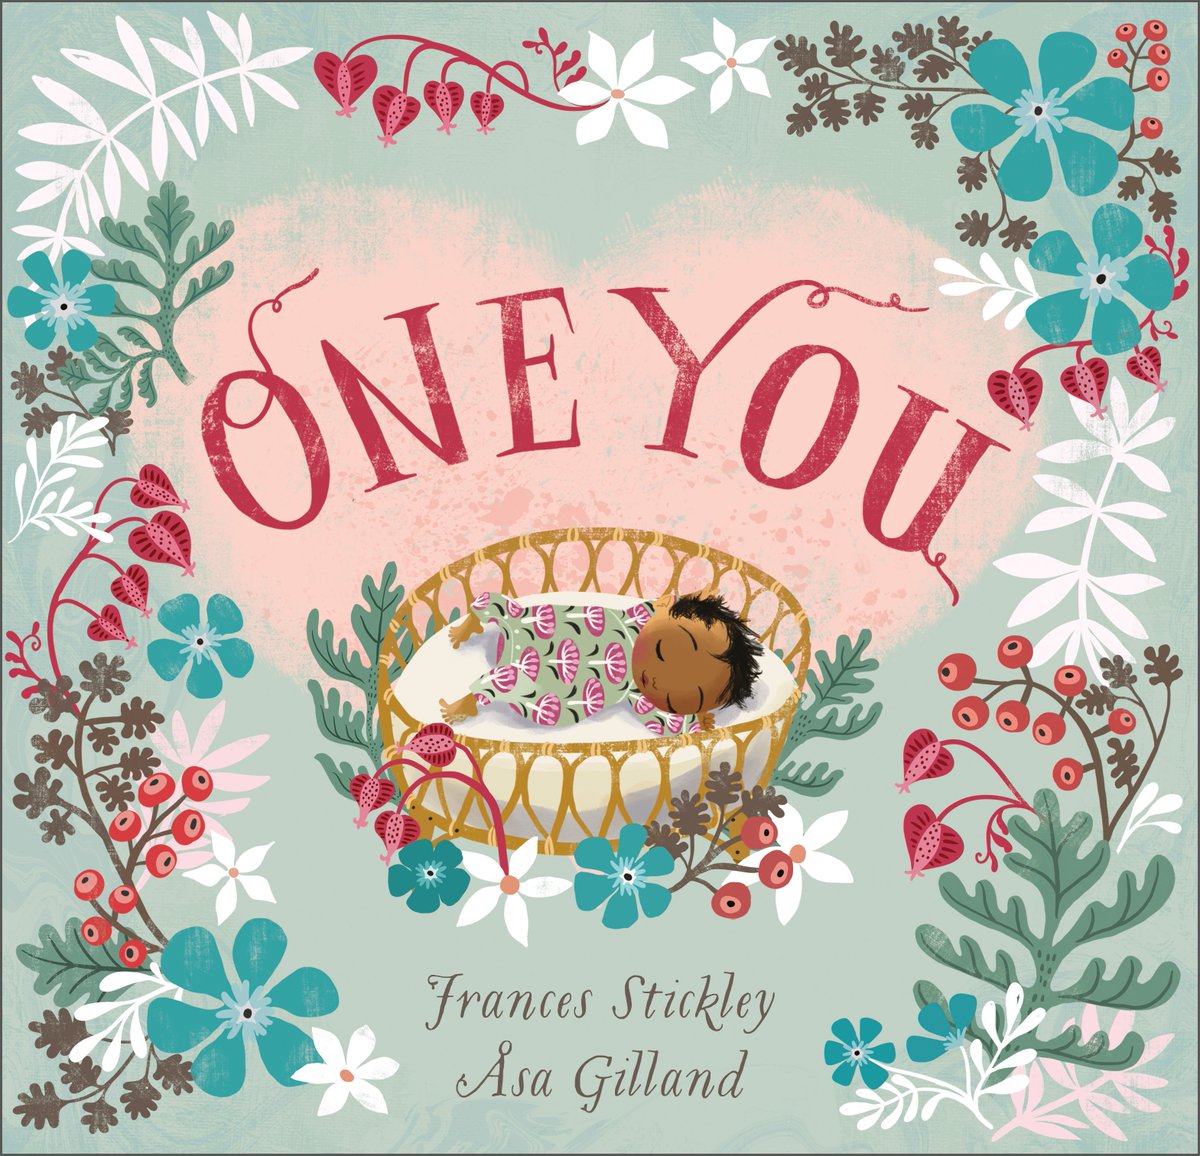 One wonderful world, and now, one you. For nine magic months, two hearts beat together, then with ten tiny fingers and ten tiny toes, a new life begins. ONE YOU by Frances Stickley and @AsaGilland is a poetic and poignant book about a child coming into the world. Out now!